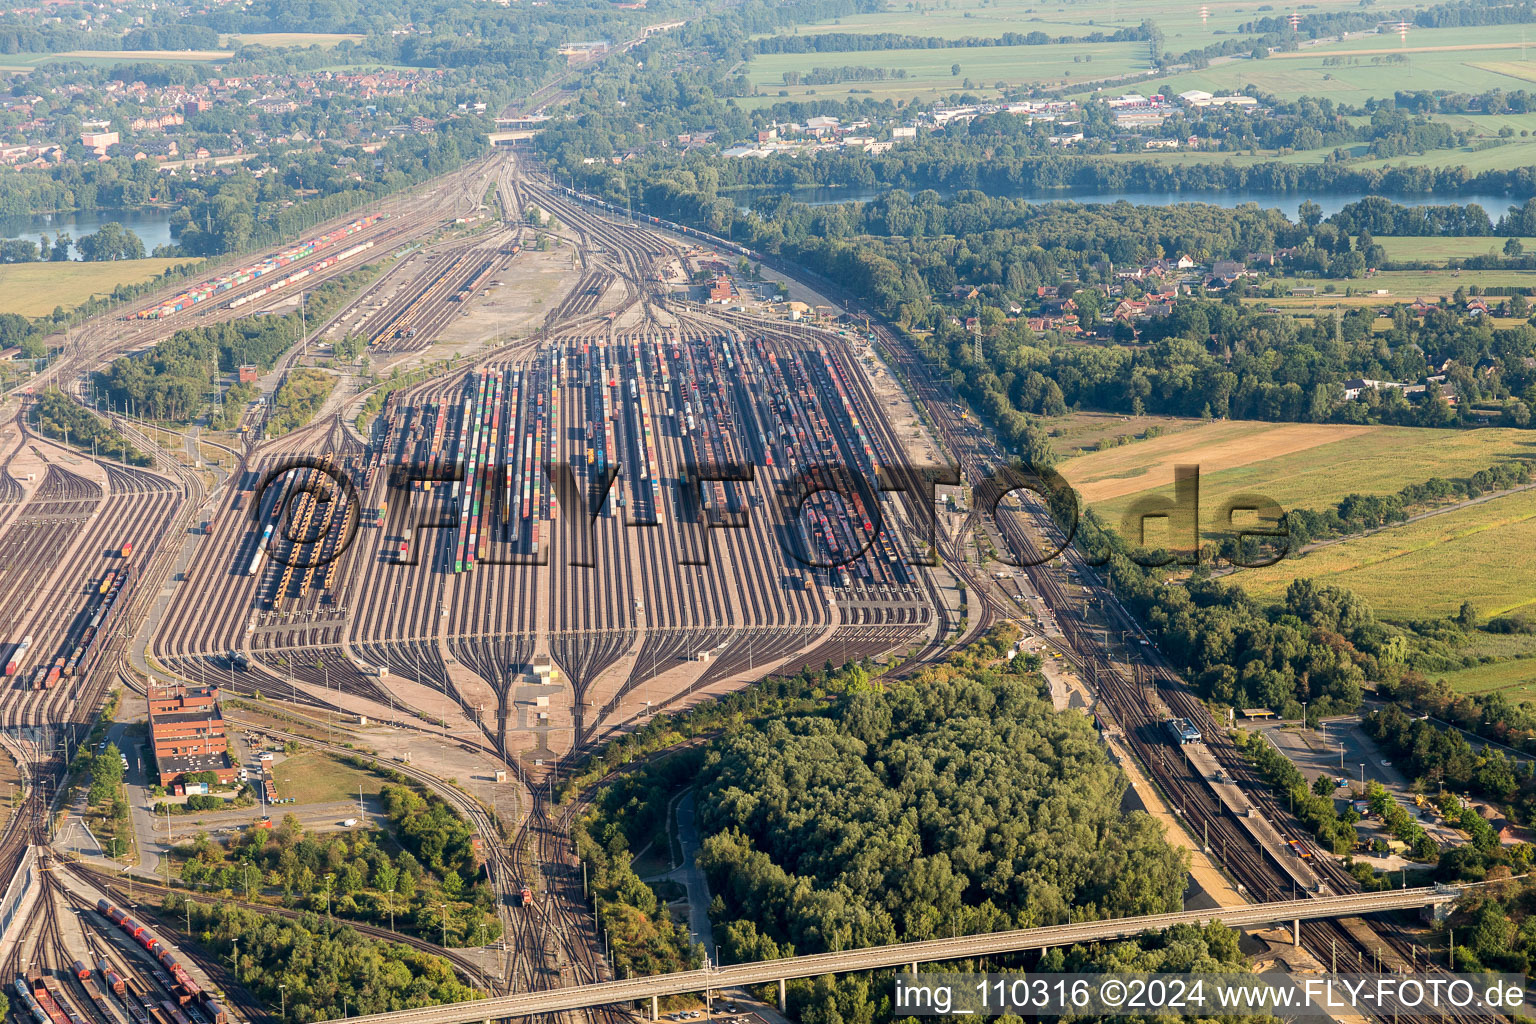 Marshalling yard and freight station Maschen of the Deutsche Bahn in the district Maschen in Seevetal in the state Lower Saxony, Germany from above